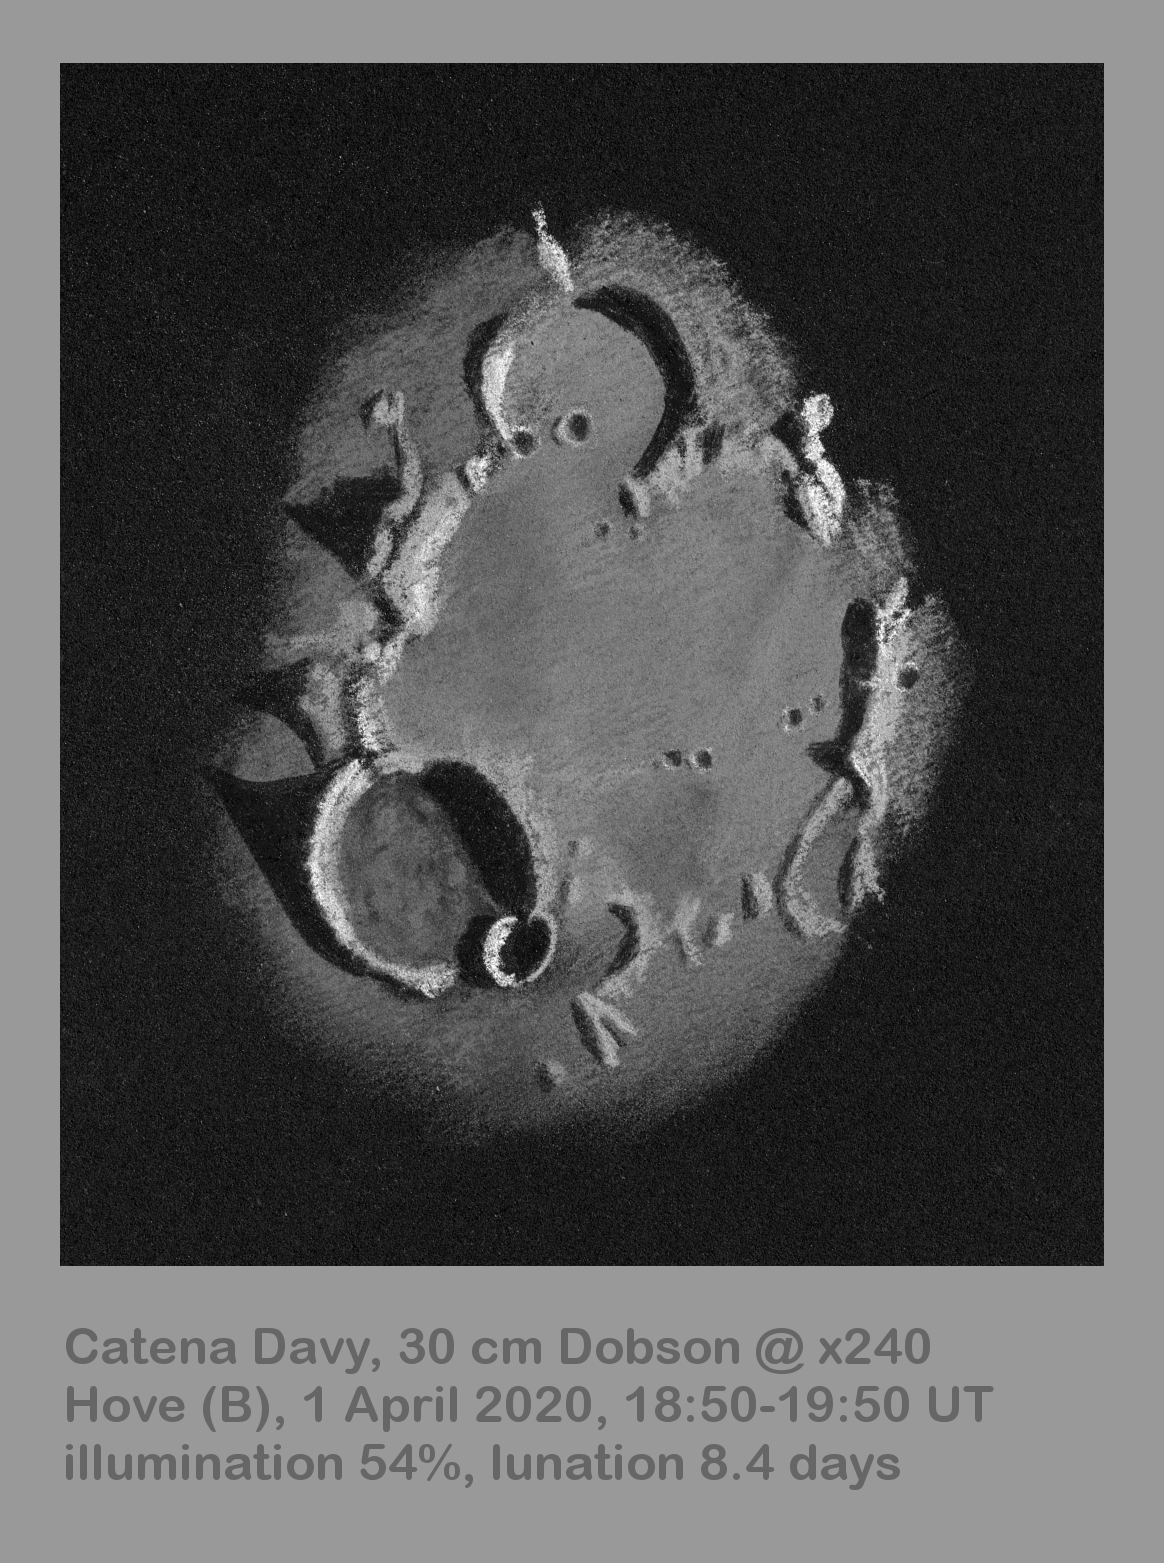 Lunar 051: Catena Davy (result of comet-fragment impacts)